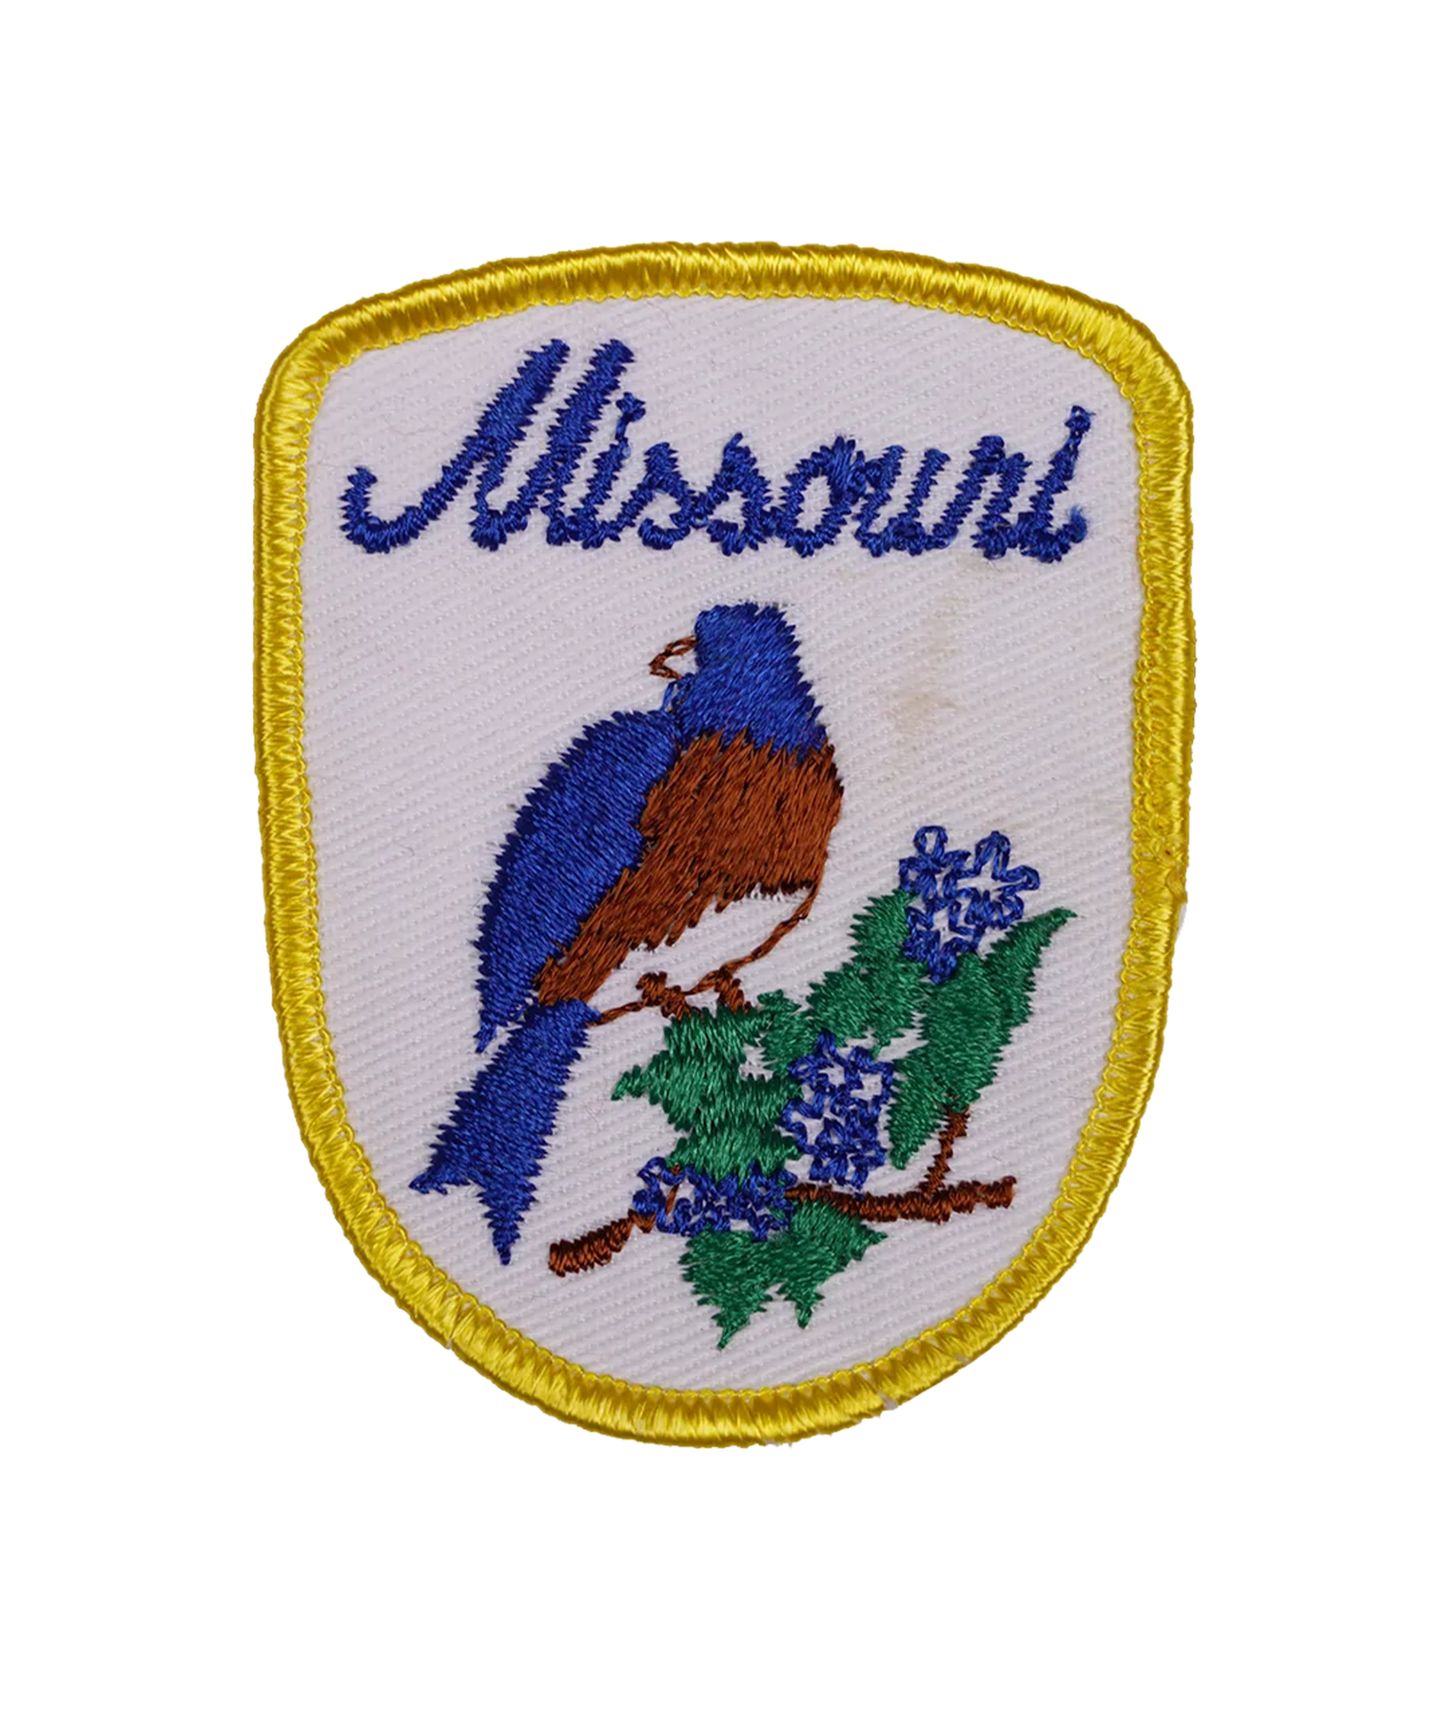 Vintage Missouri Embroidered Patch